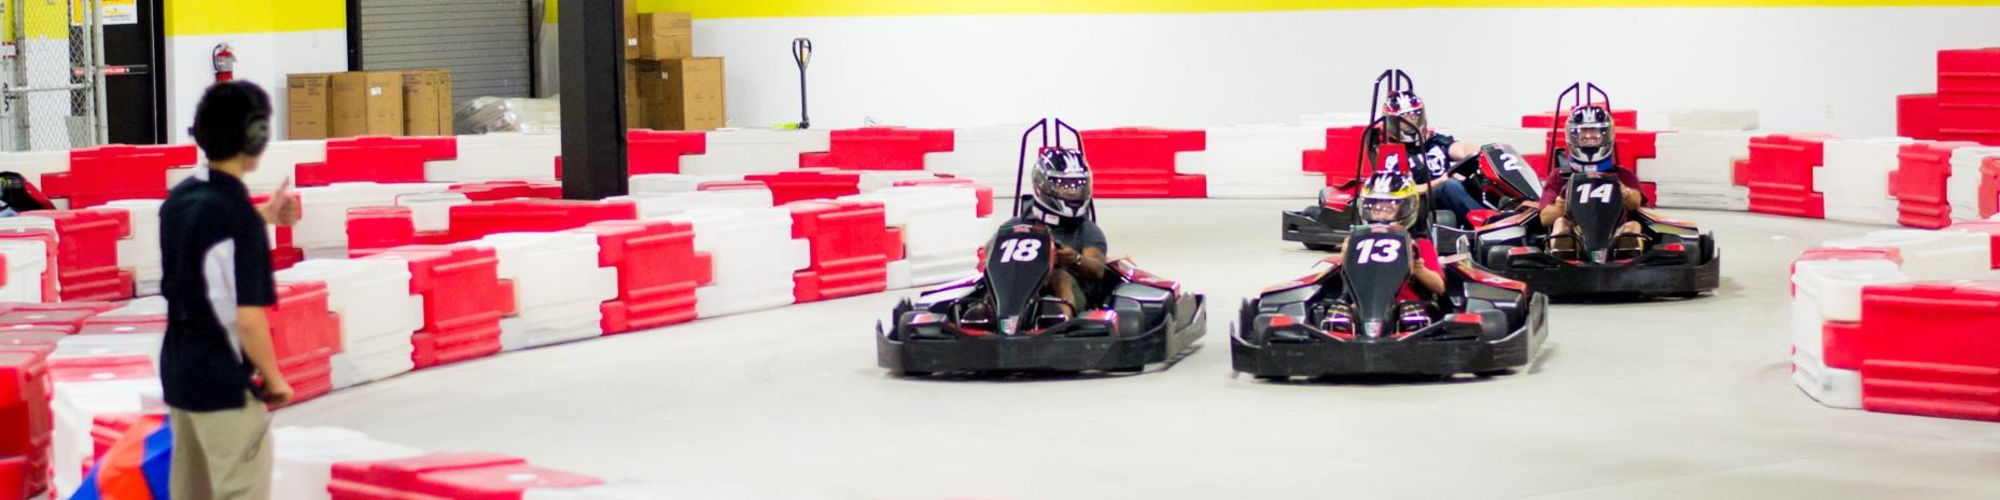 Thunderbolt Indoor Karting  cover image